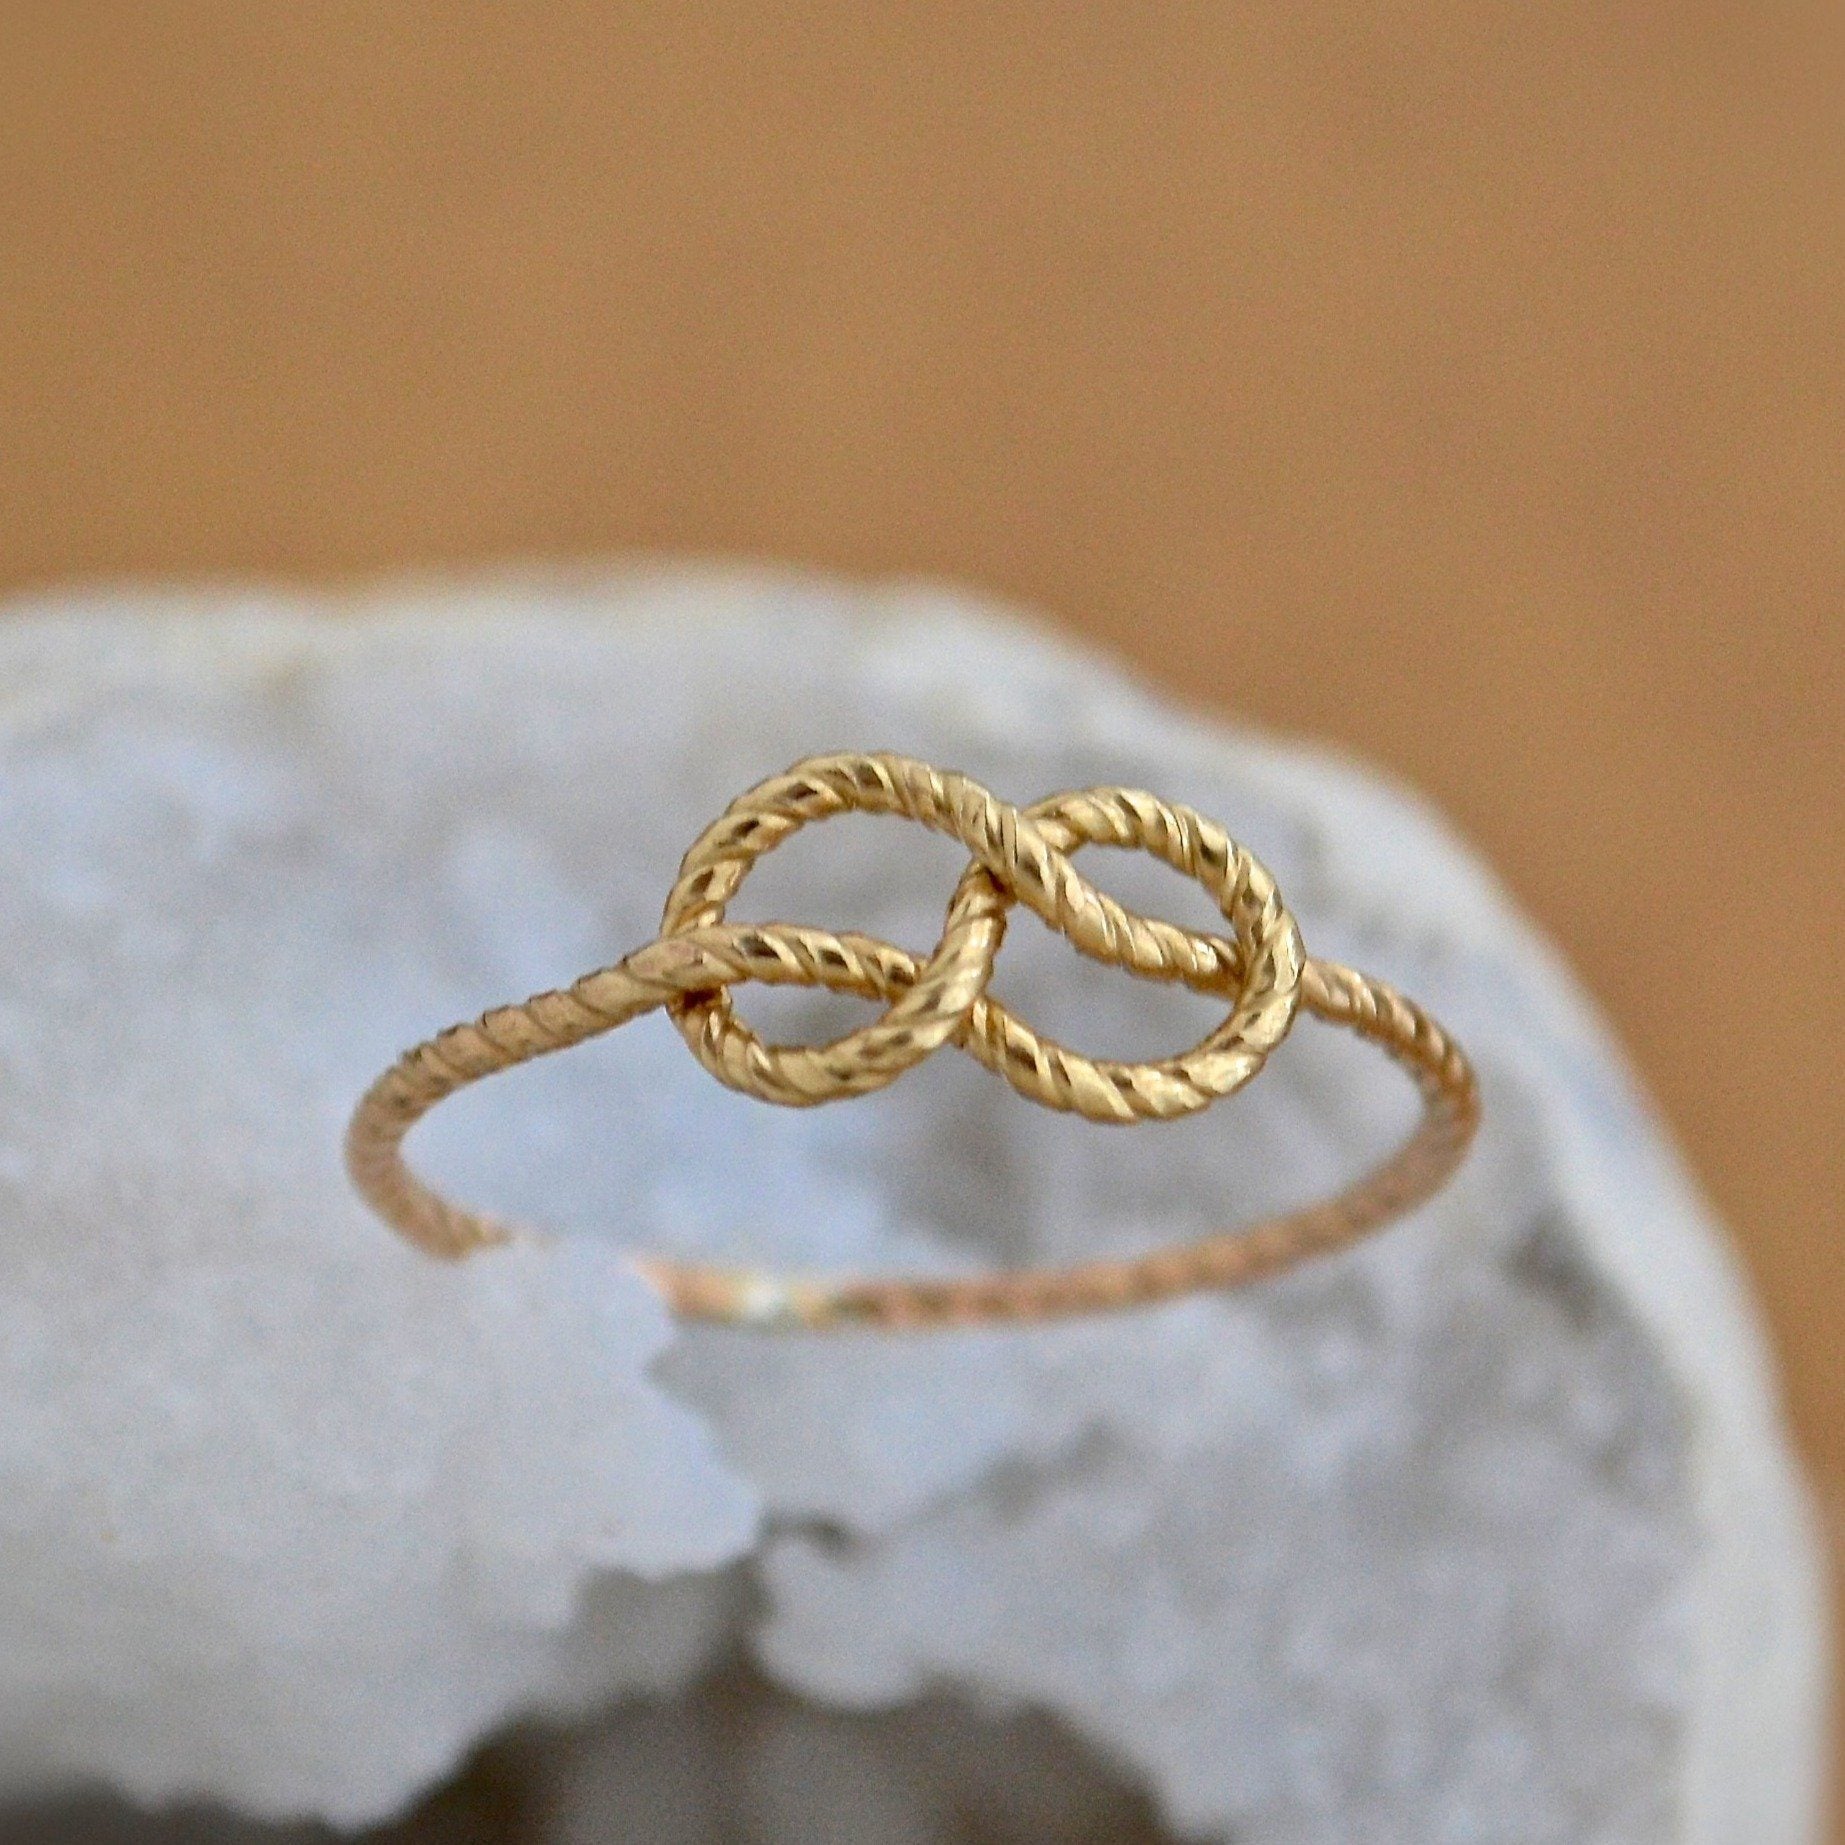 Sailor's Knot Ring - handmade nautical minimalist infinity rope knot ring - Foamy Wader